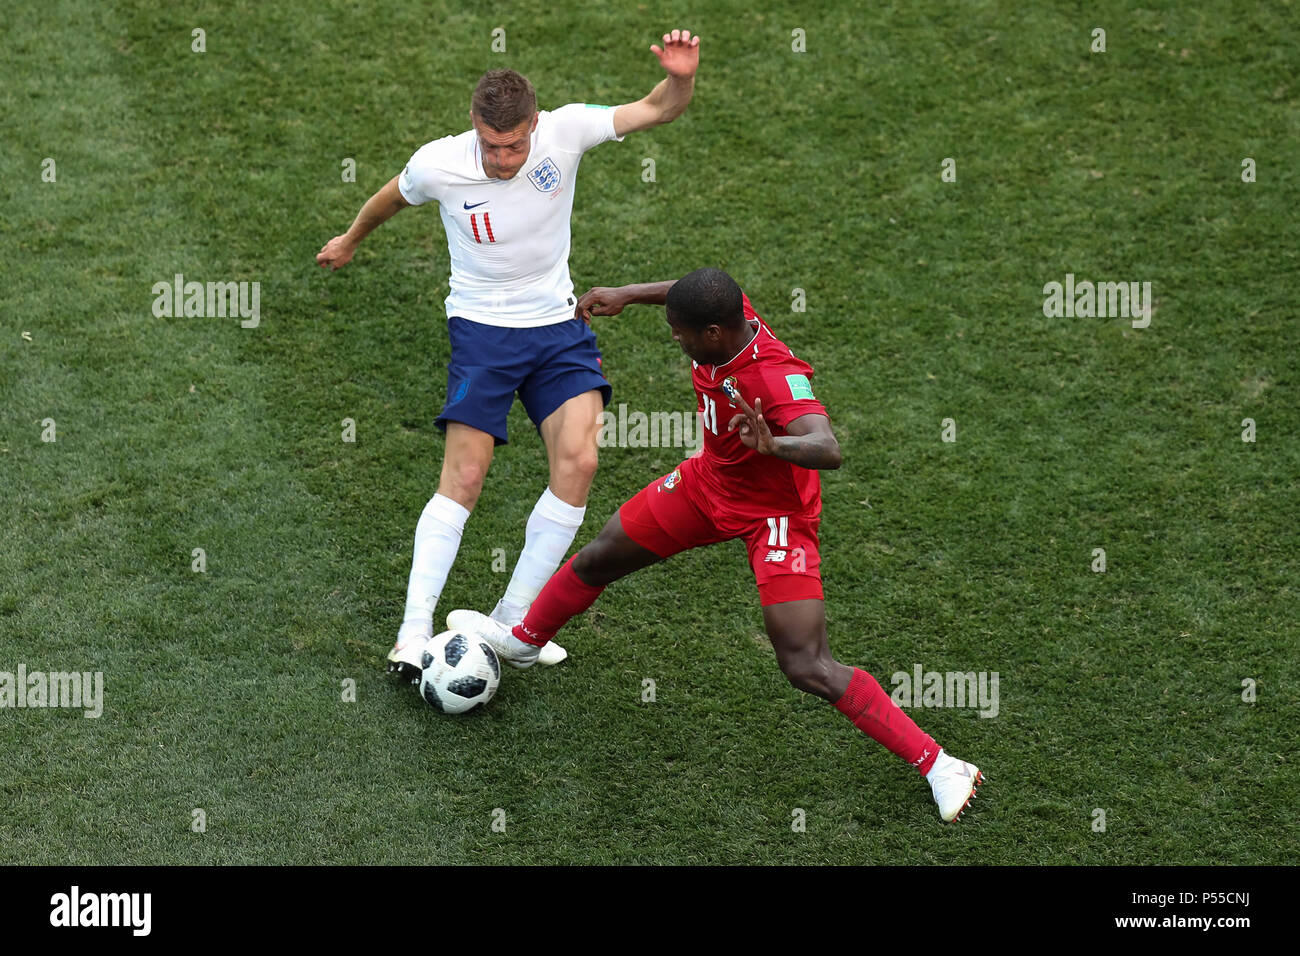 Jamie Vardy of England and Armando Cooper of Panama during the 2018 FIFA World Cup Group G match between England and Panama at Nizhny Novgorod Stadium on June 24th 2018 in Nizhny Novgorod, Russia. (Photo by Daniel Chesterton/phcimages.com) Stock Photo